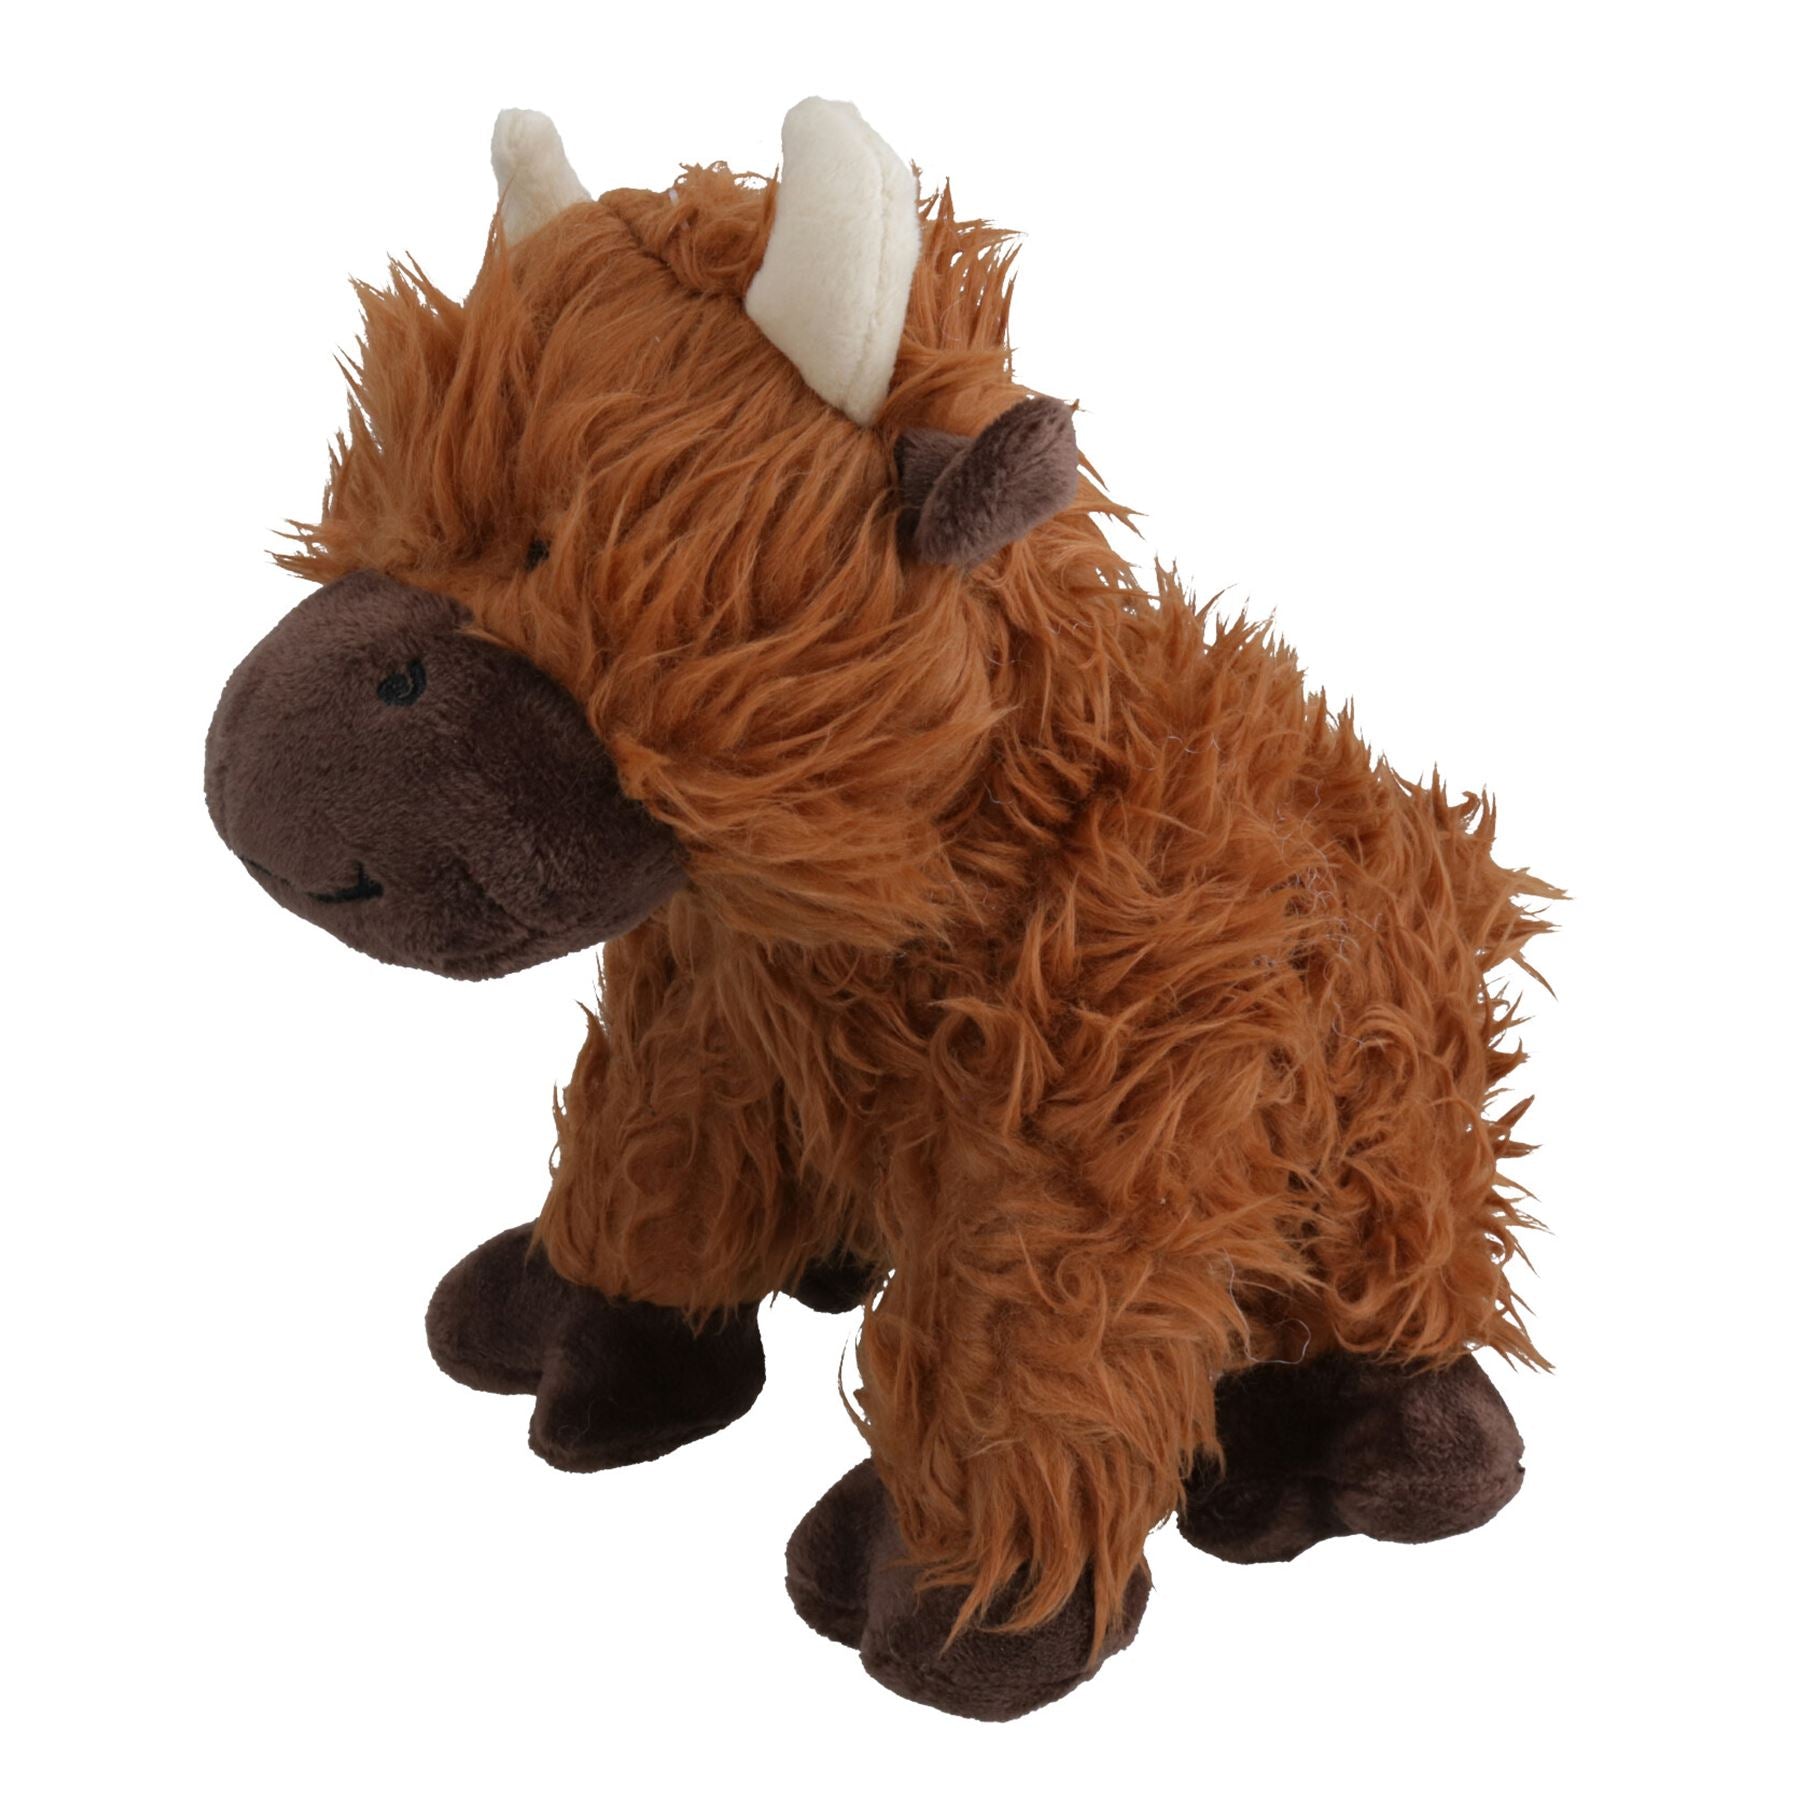 Super Tough Squeaky Plush Rope Core Brown Cow Dog Puppy Gift Play Toy